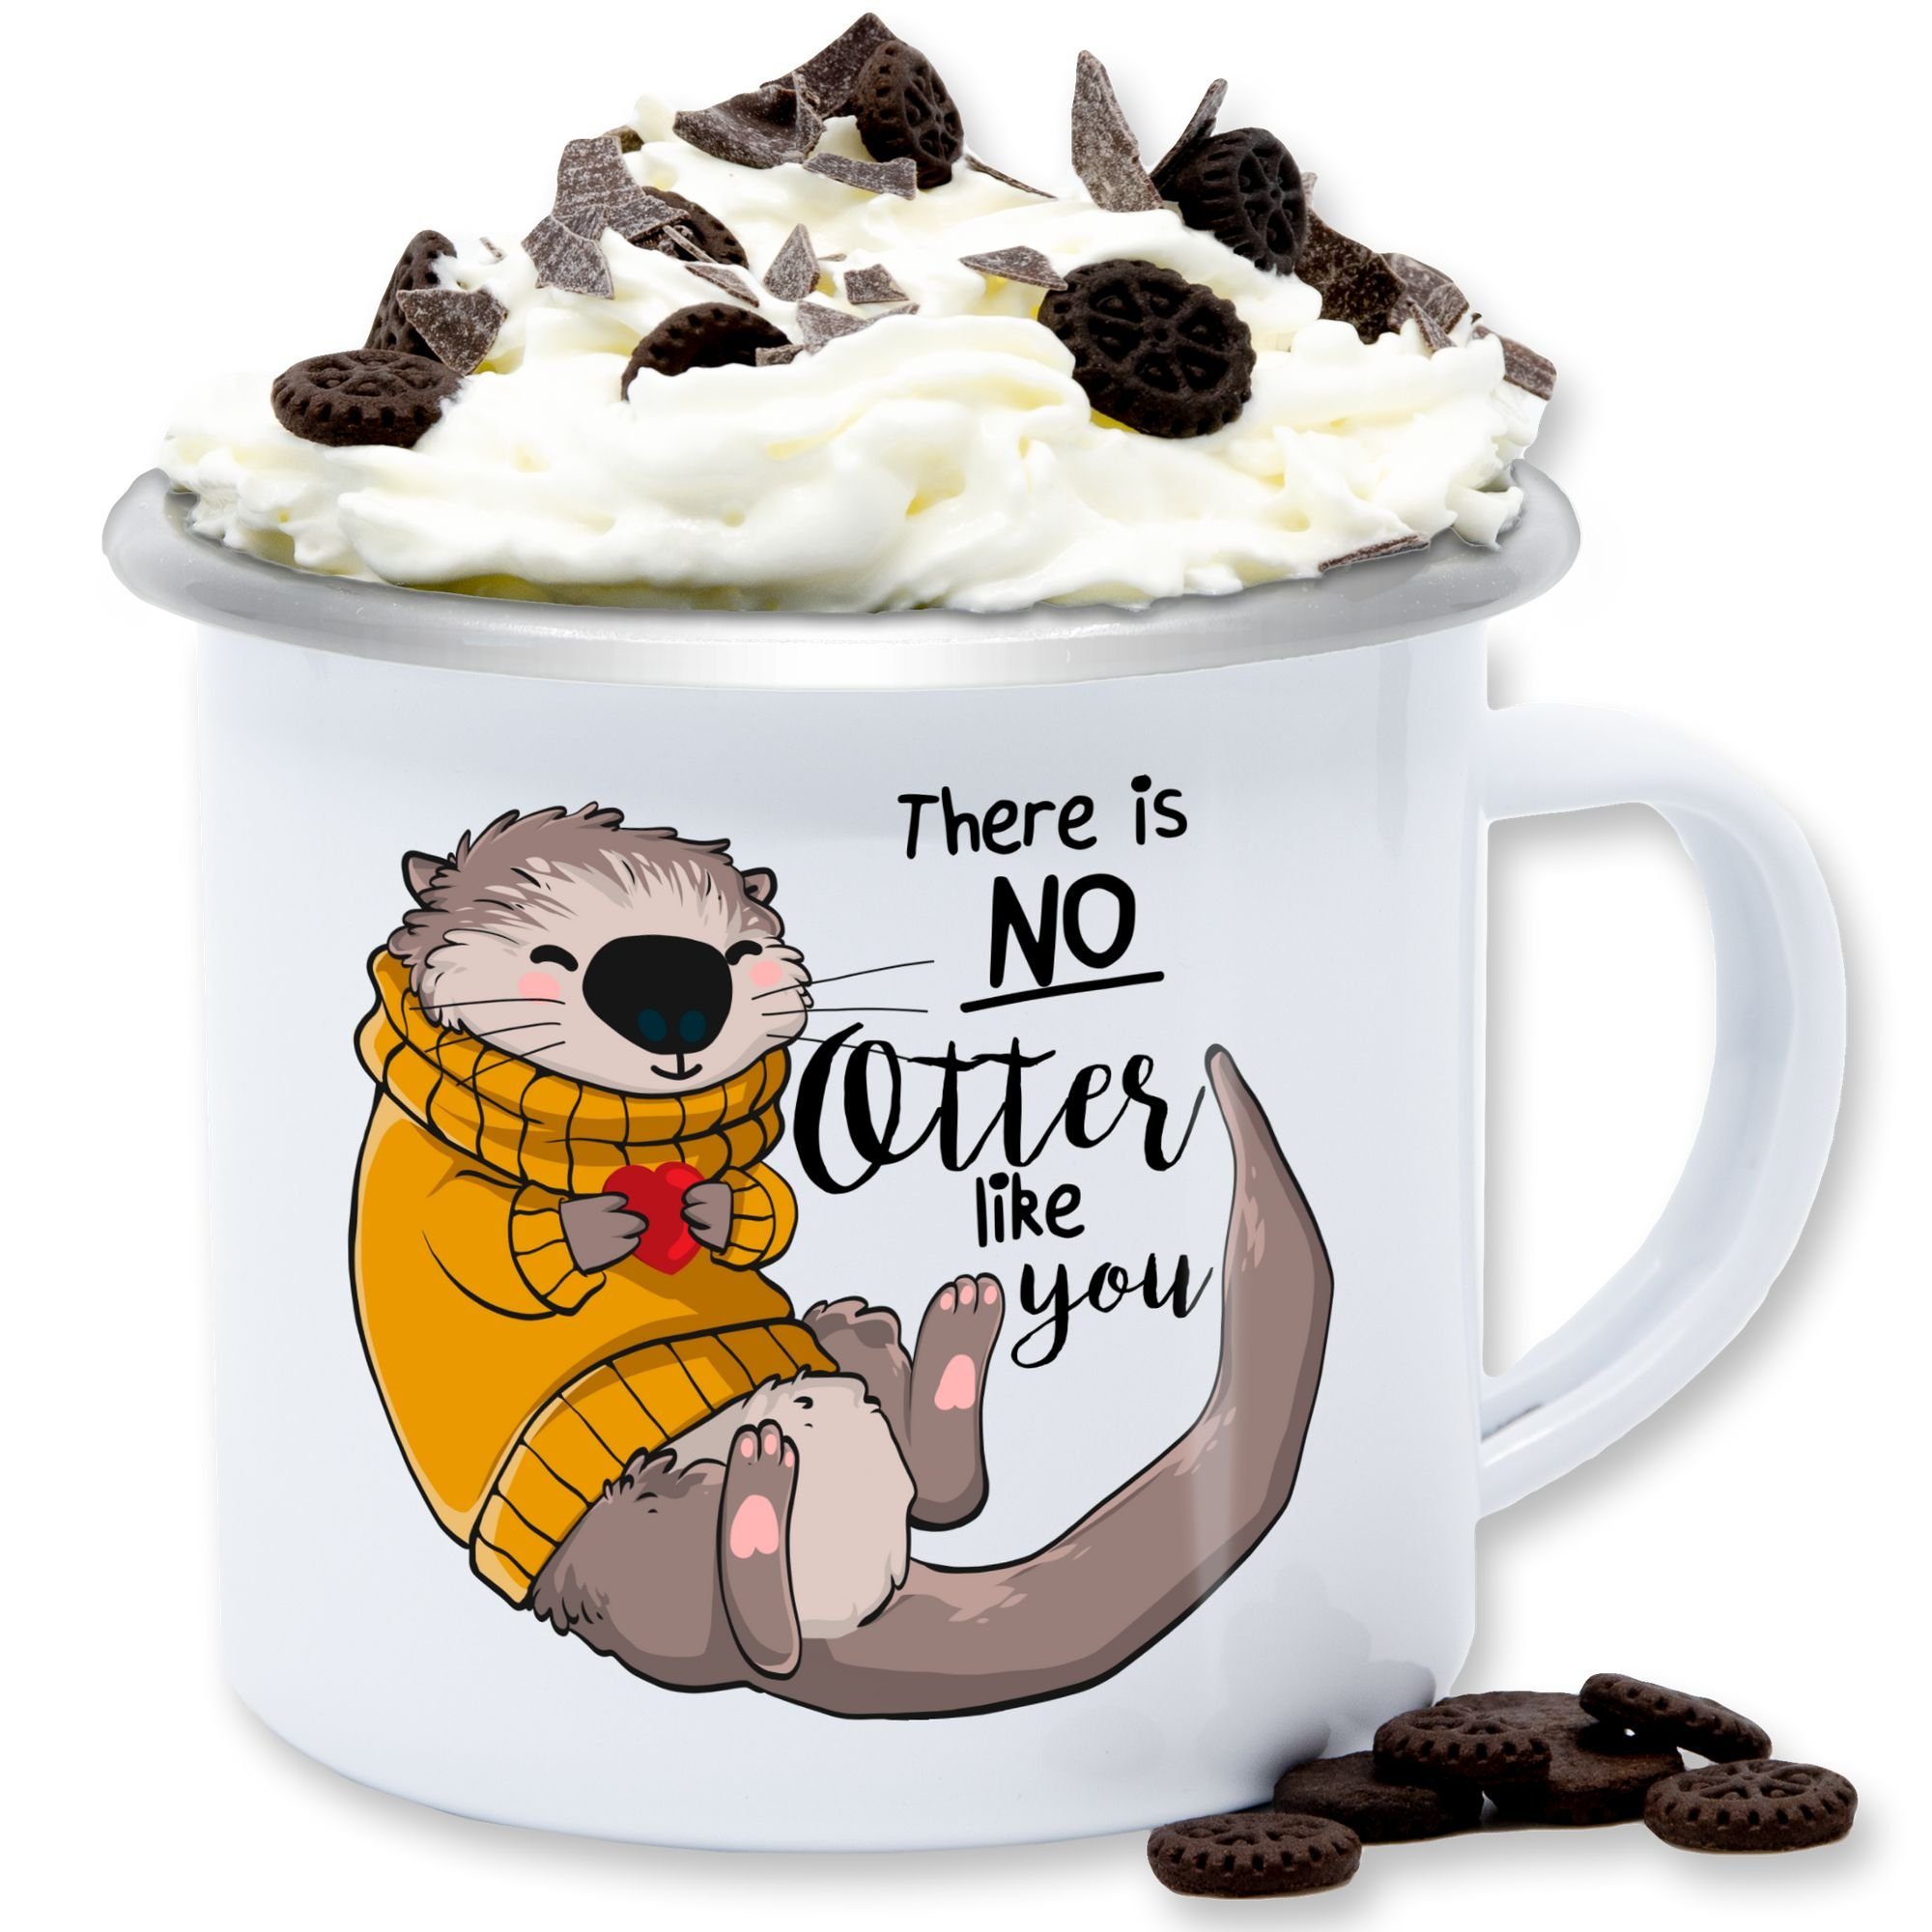 Shirtracer Tasse There is no Otter like you, Stahlblech, Statement Sprüche 3 Weiß Silber